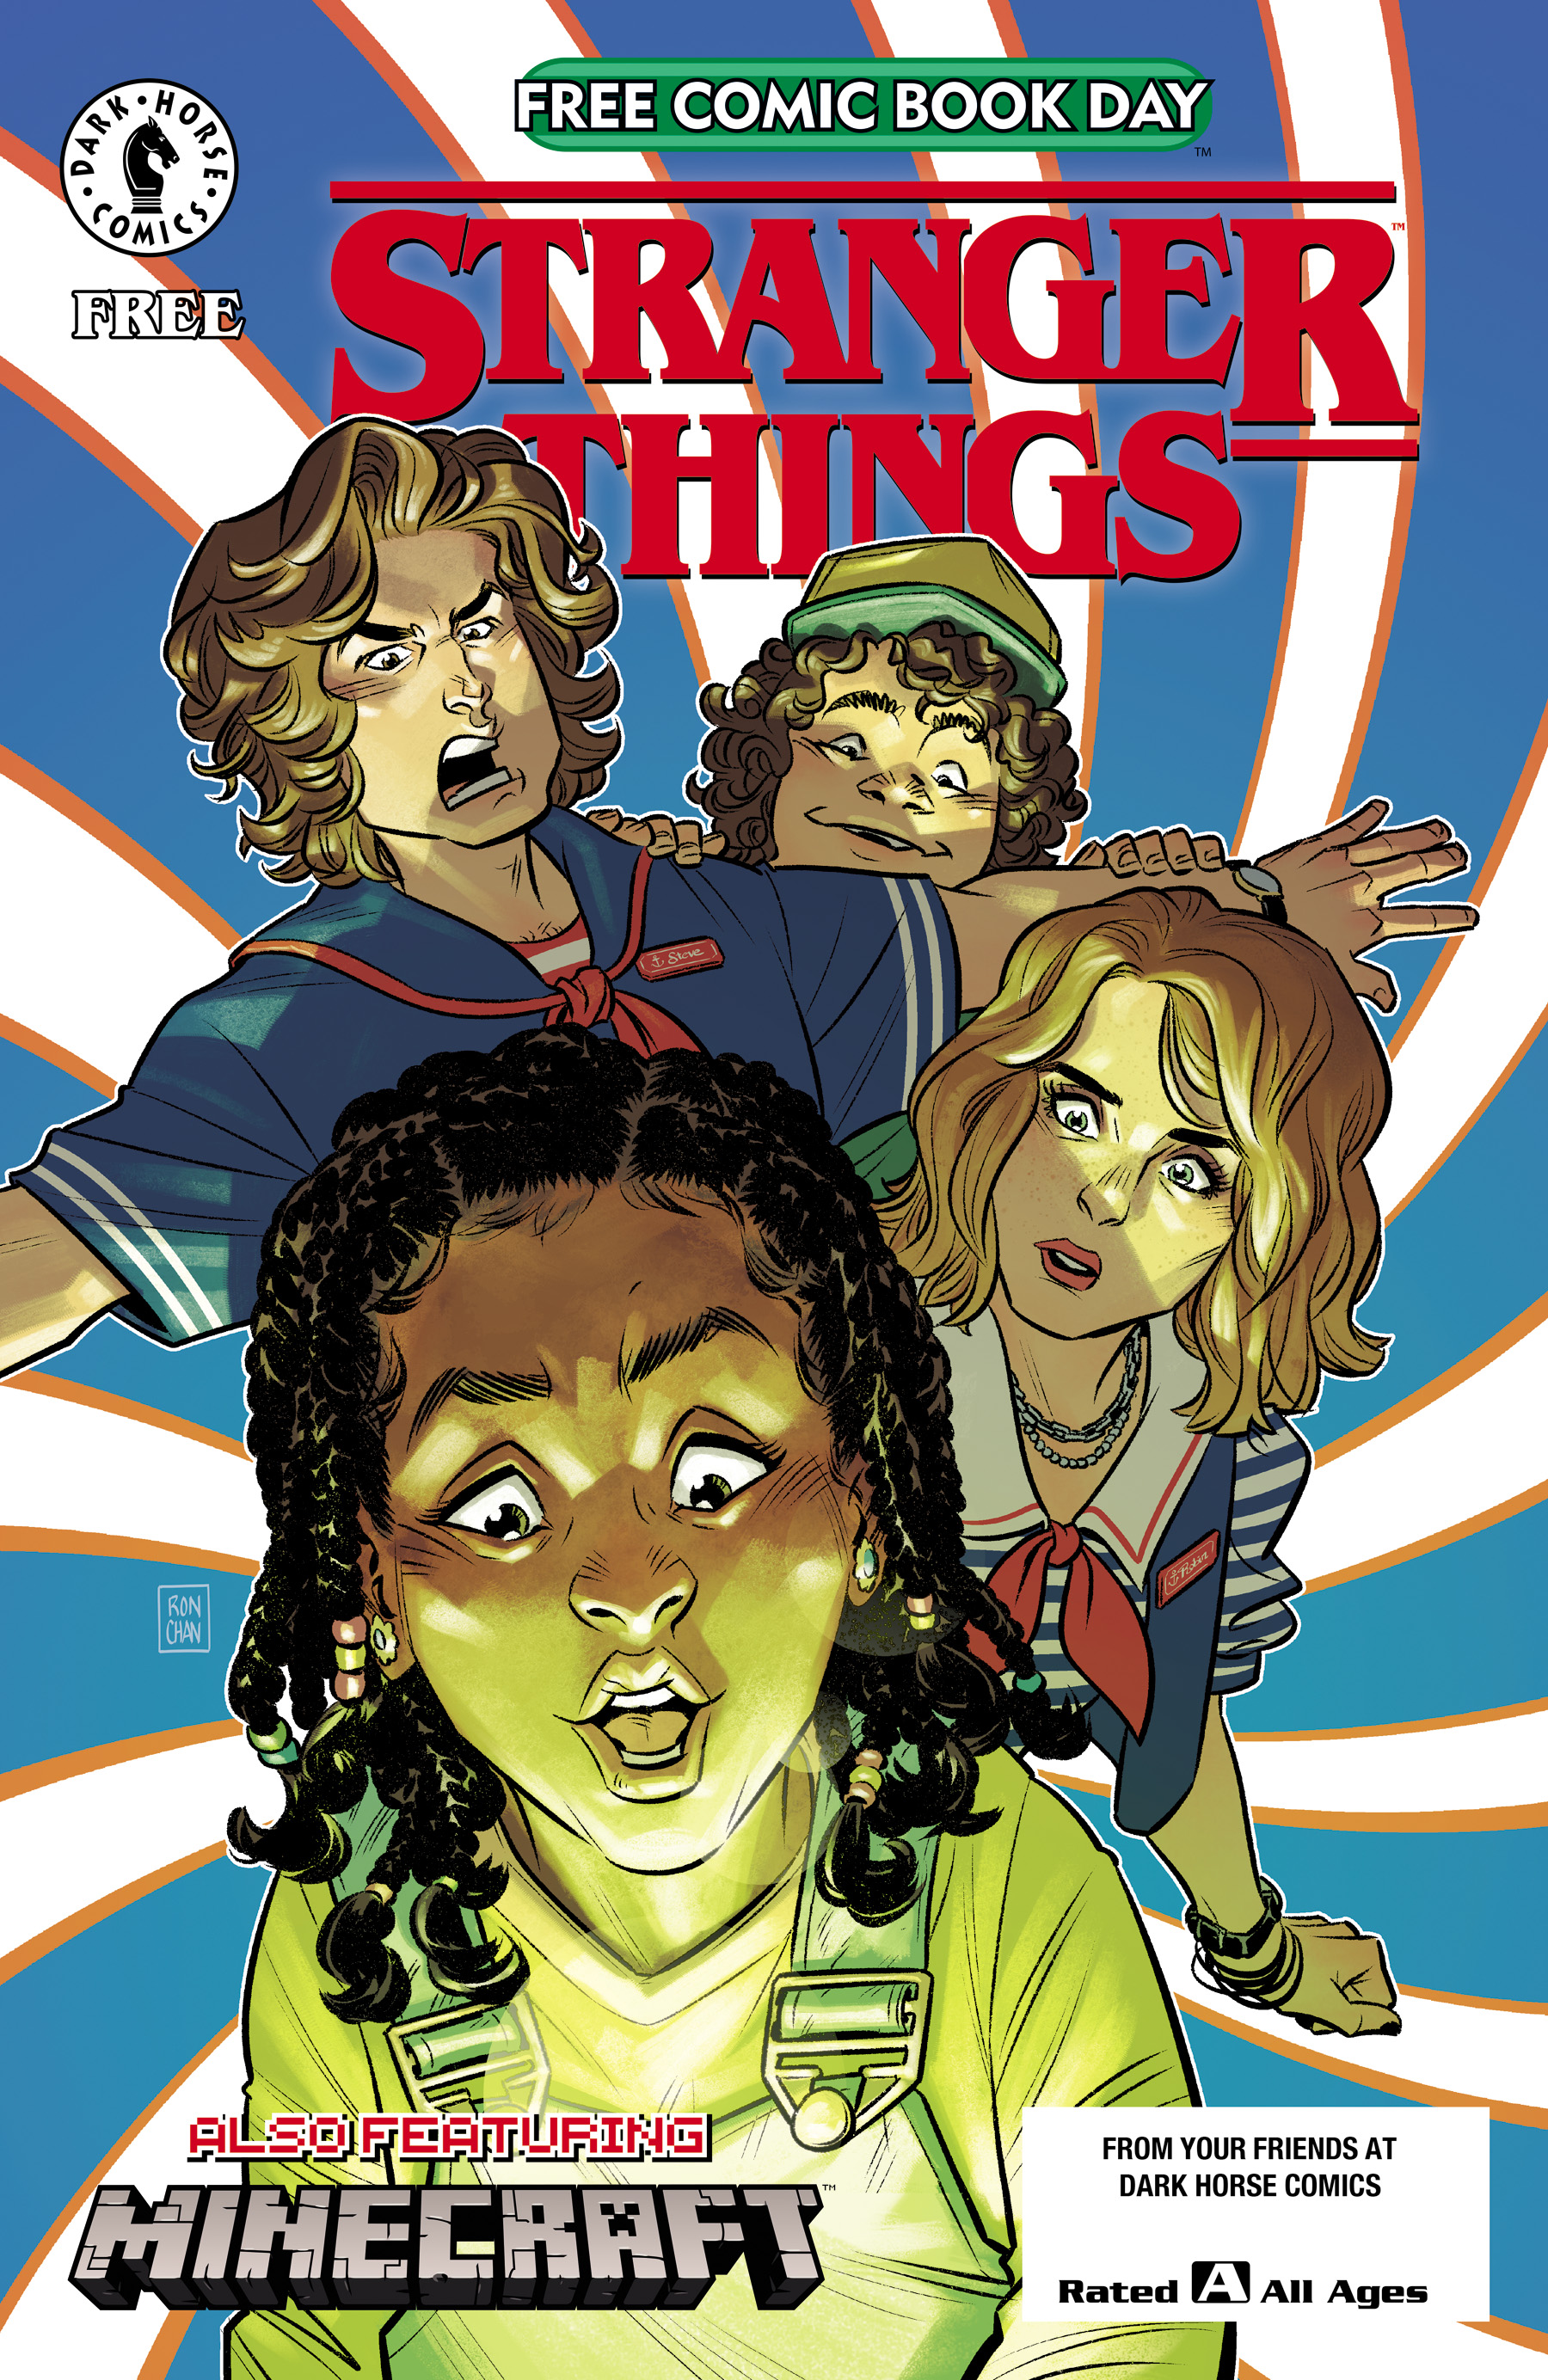 Read online Free Comic Book Day 2022 comic -  Issue # Stranger Things ft. Minecraft - 1